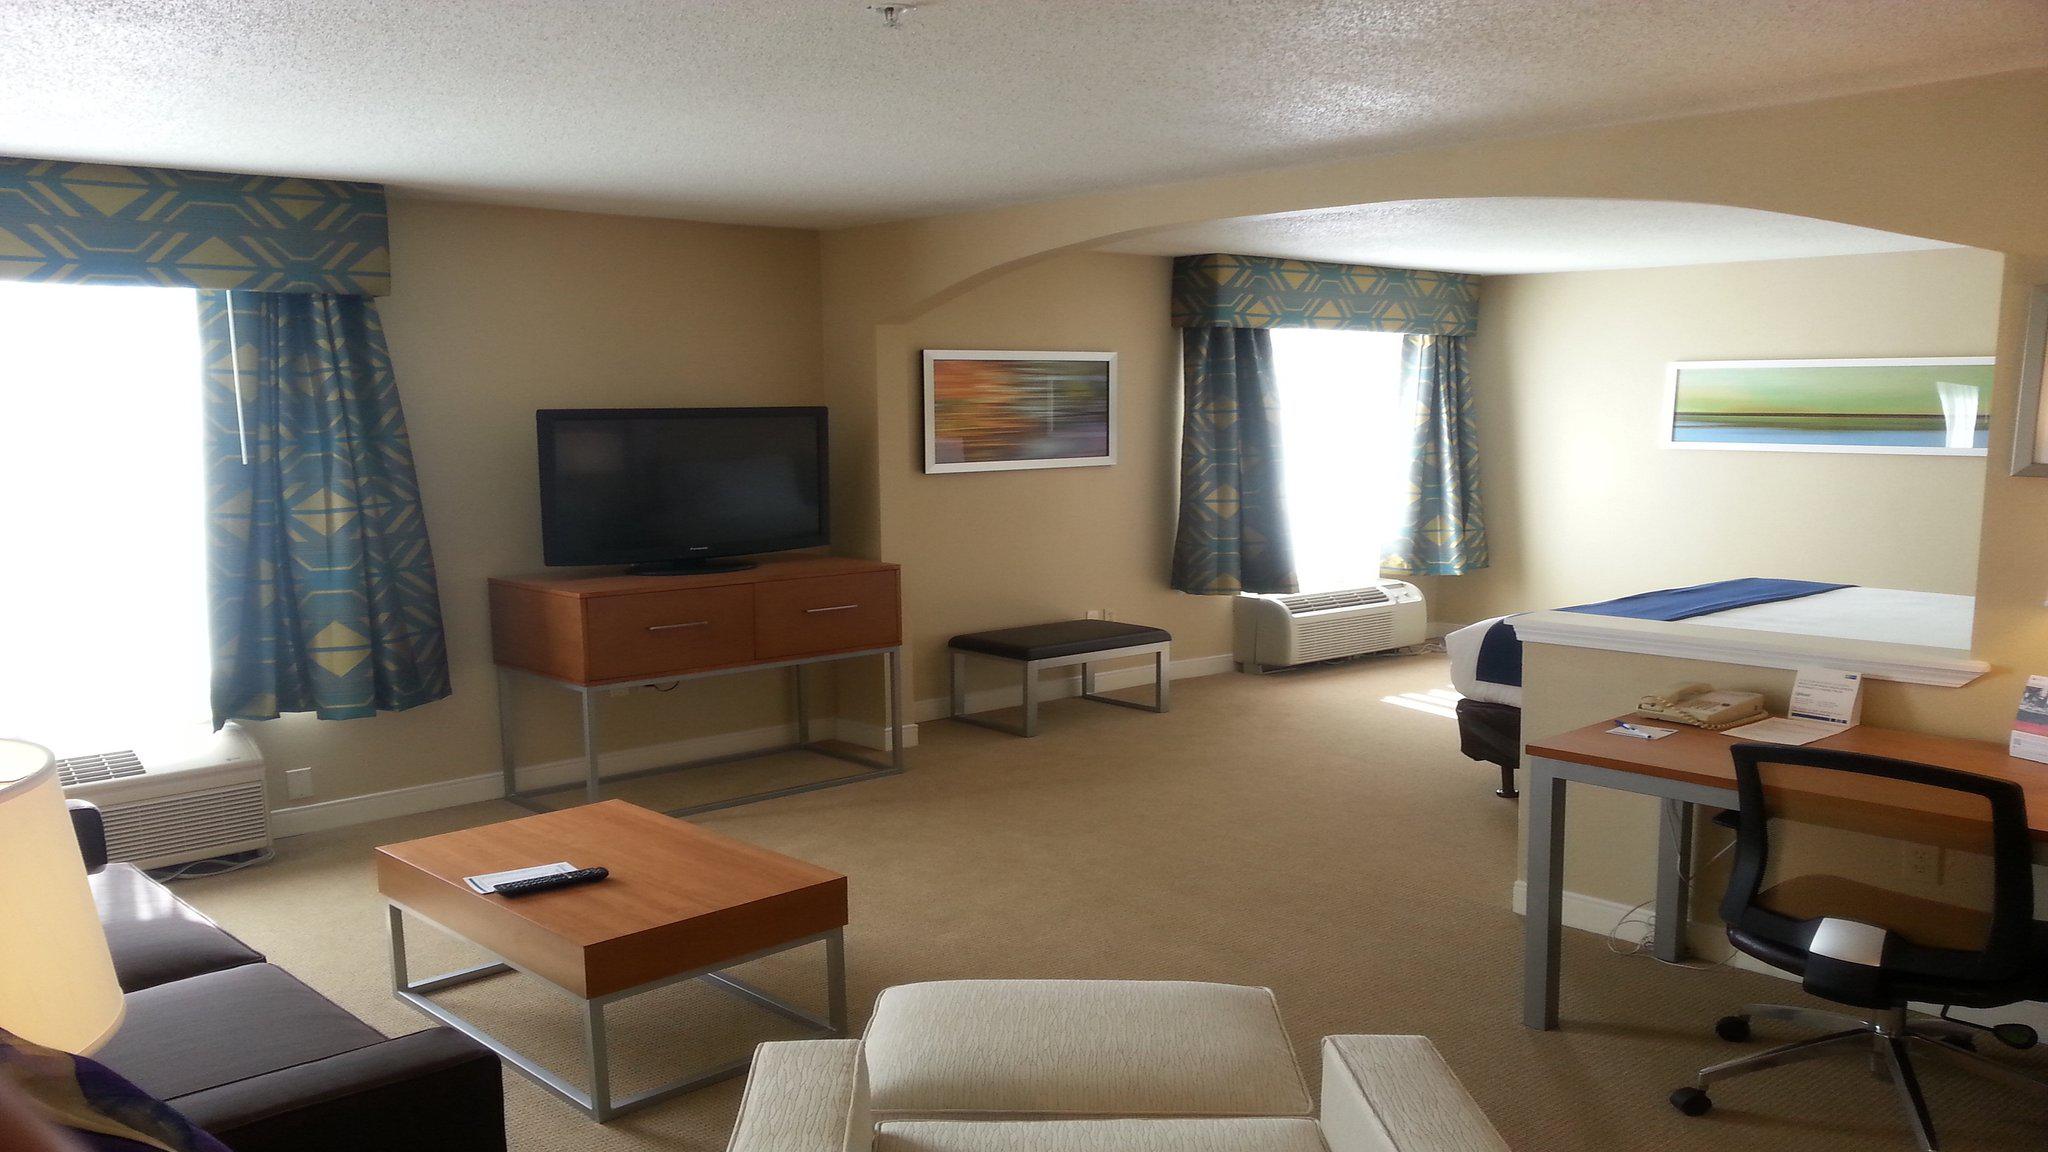 Holiday Inn Express & Suites Houston North-Spring Area Photo